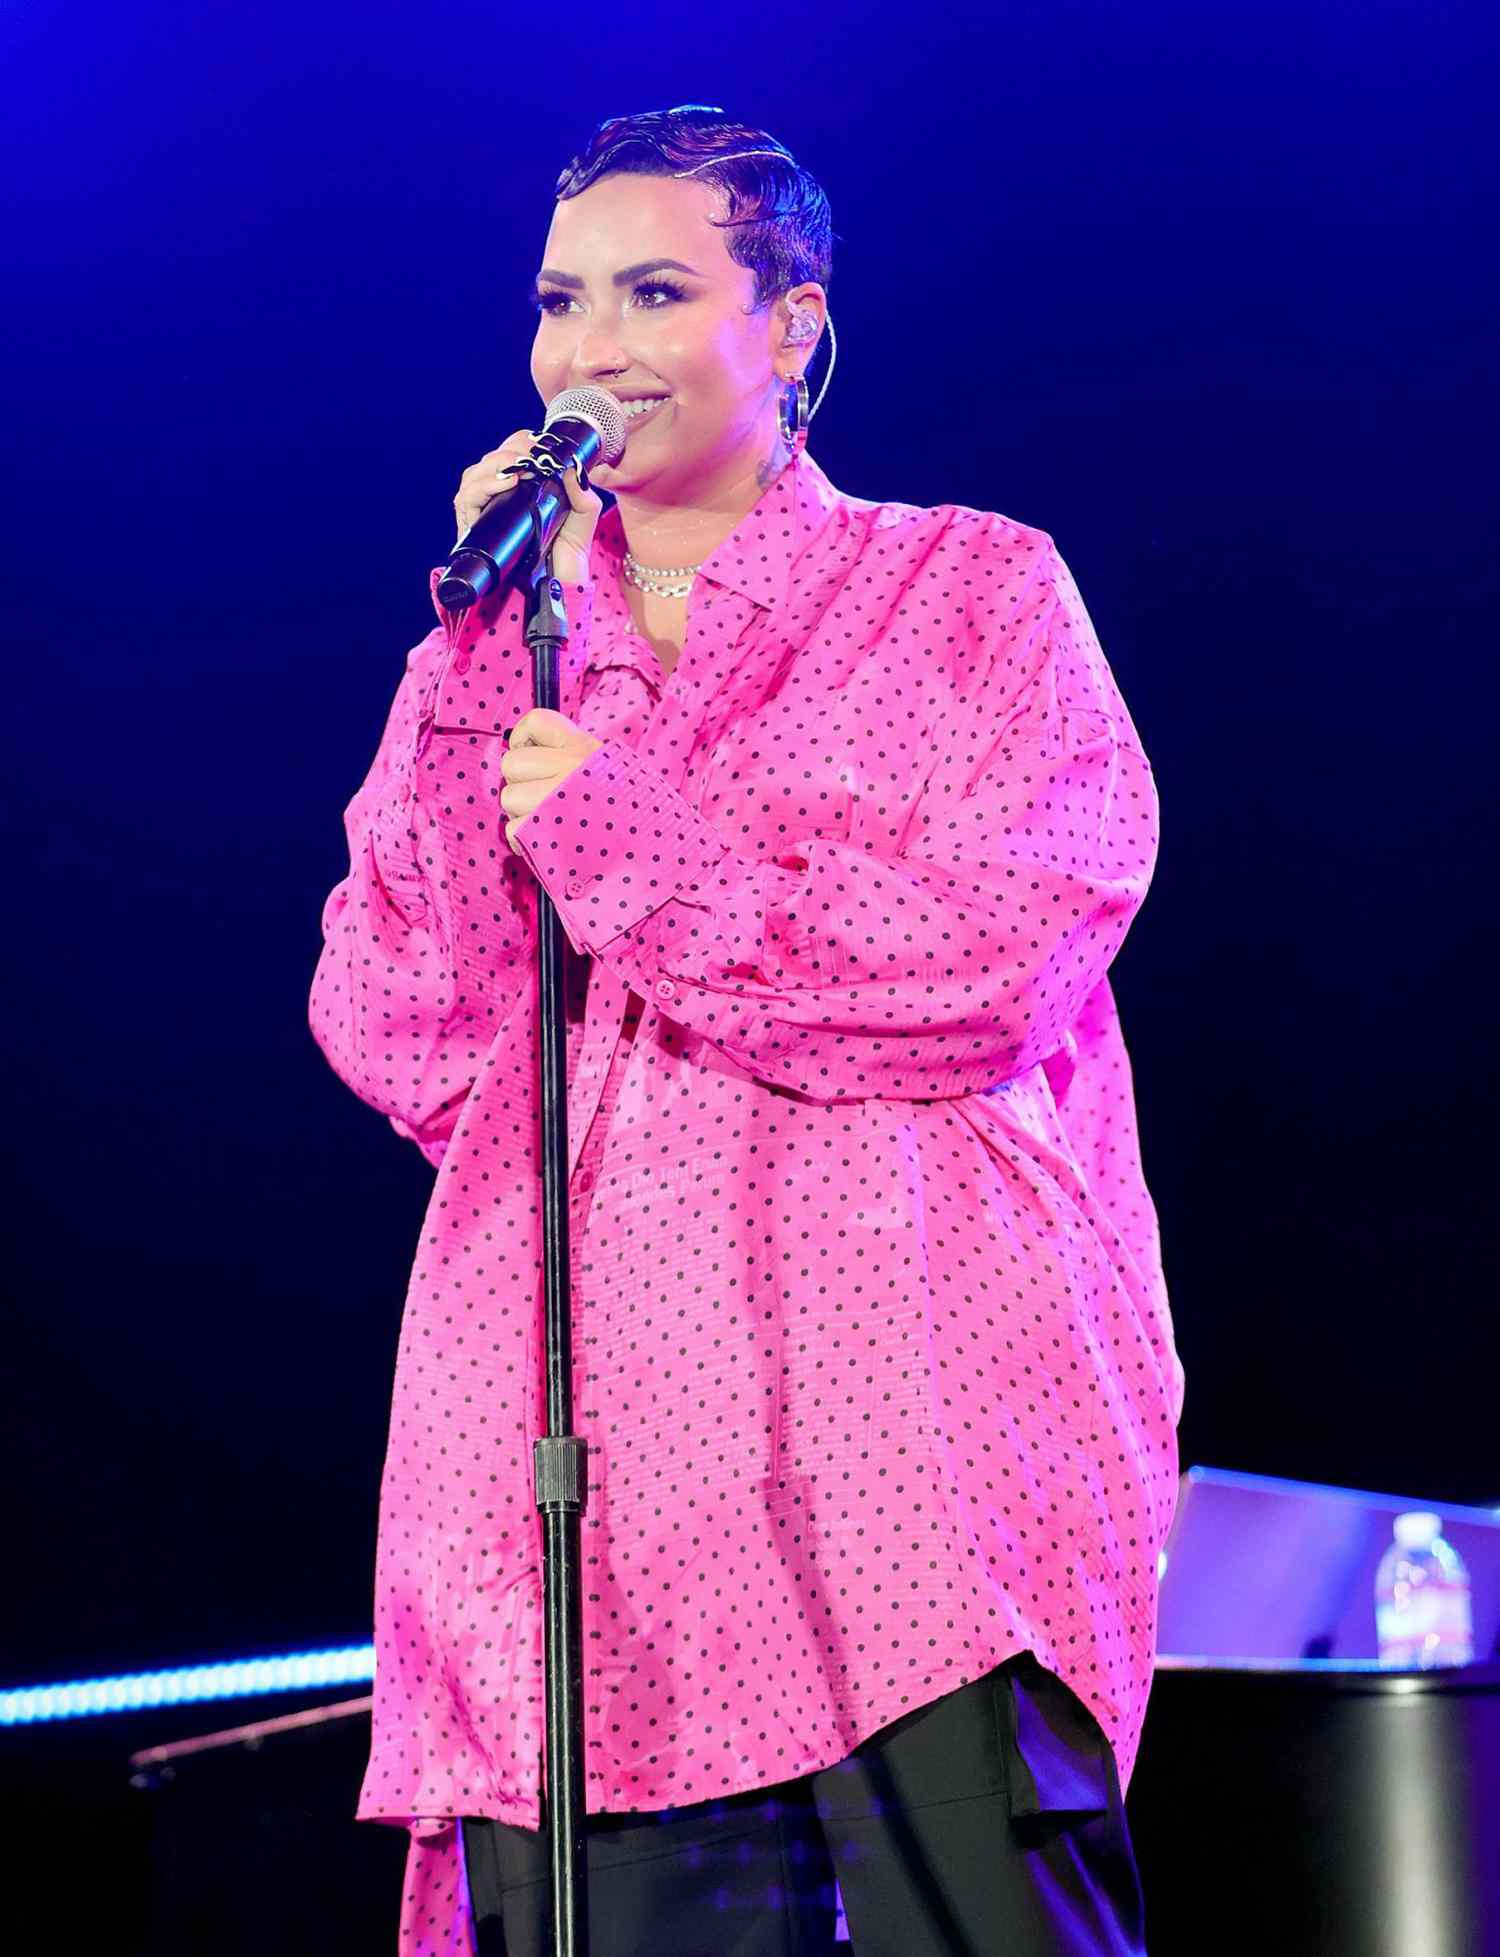 Demi Lovato performs onstage during the OBB Premiere Event for YouTube Originals Docuseries "Demi Lovato: Dancing With The Devil" at The Beverly Hilton on March 22, 2021